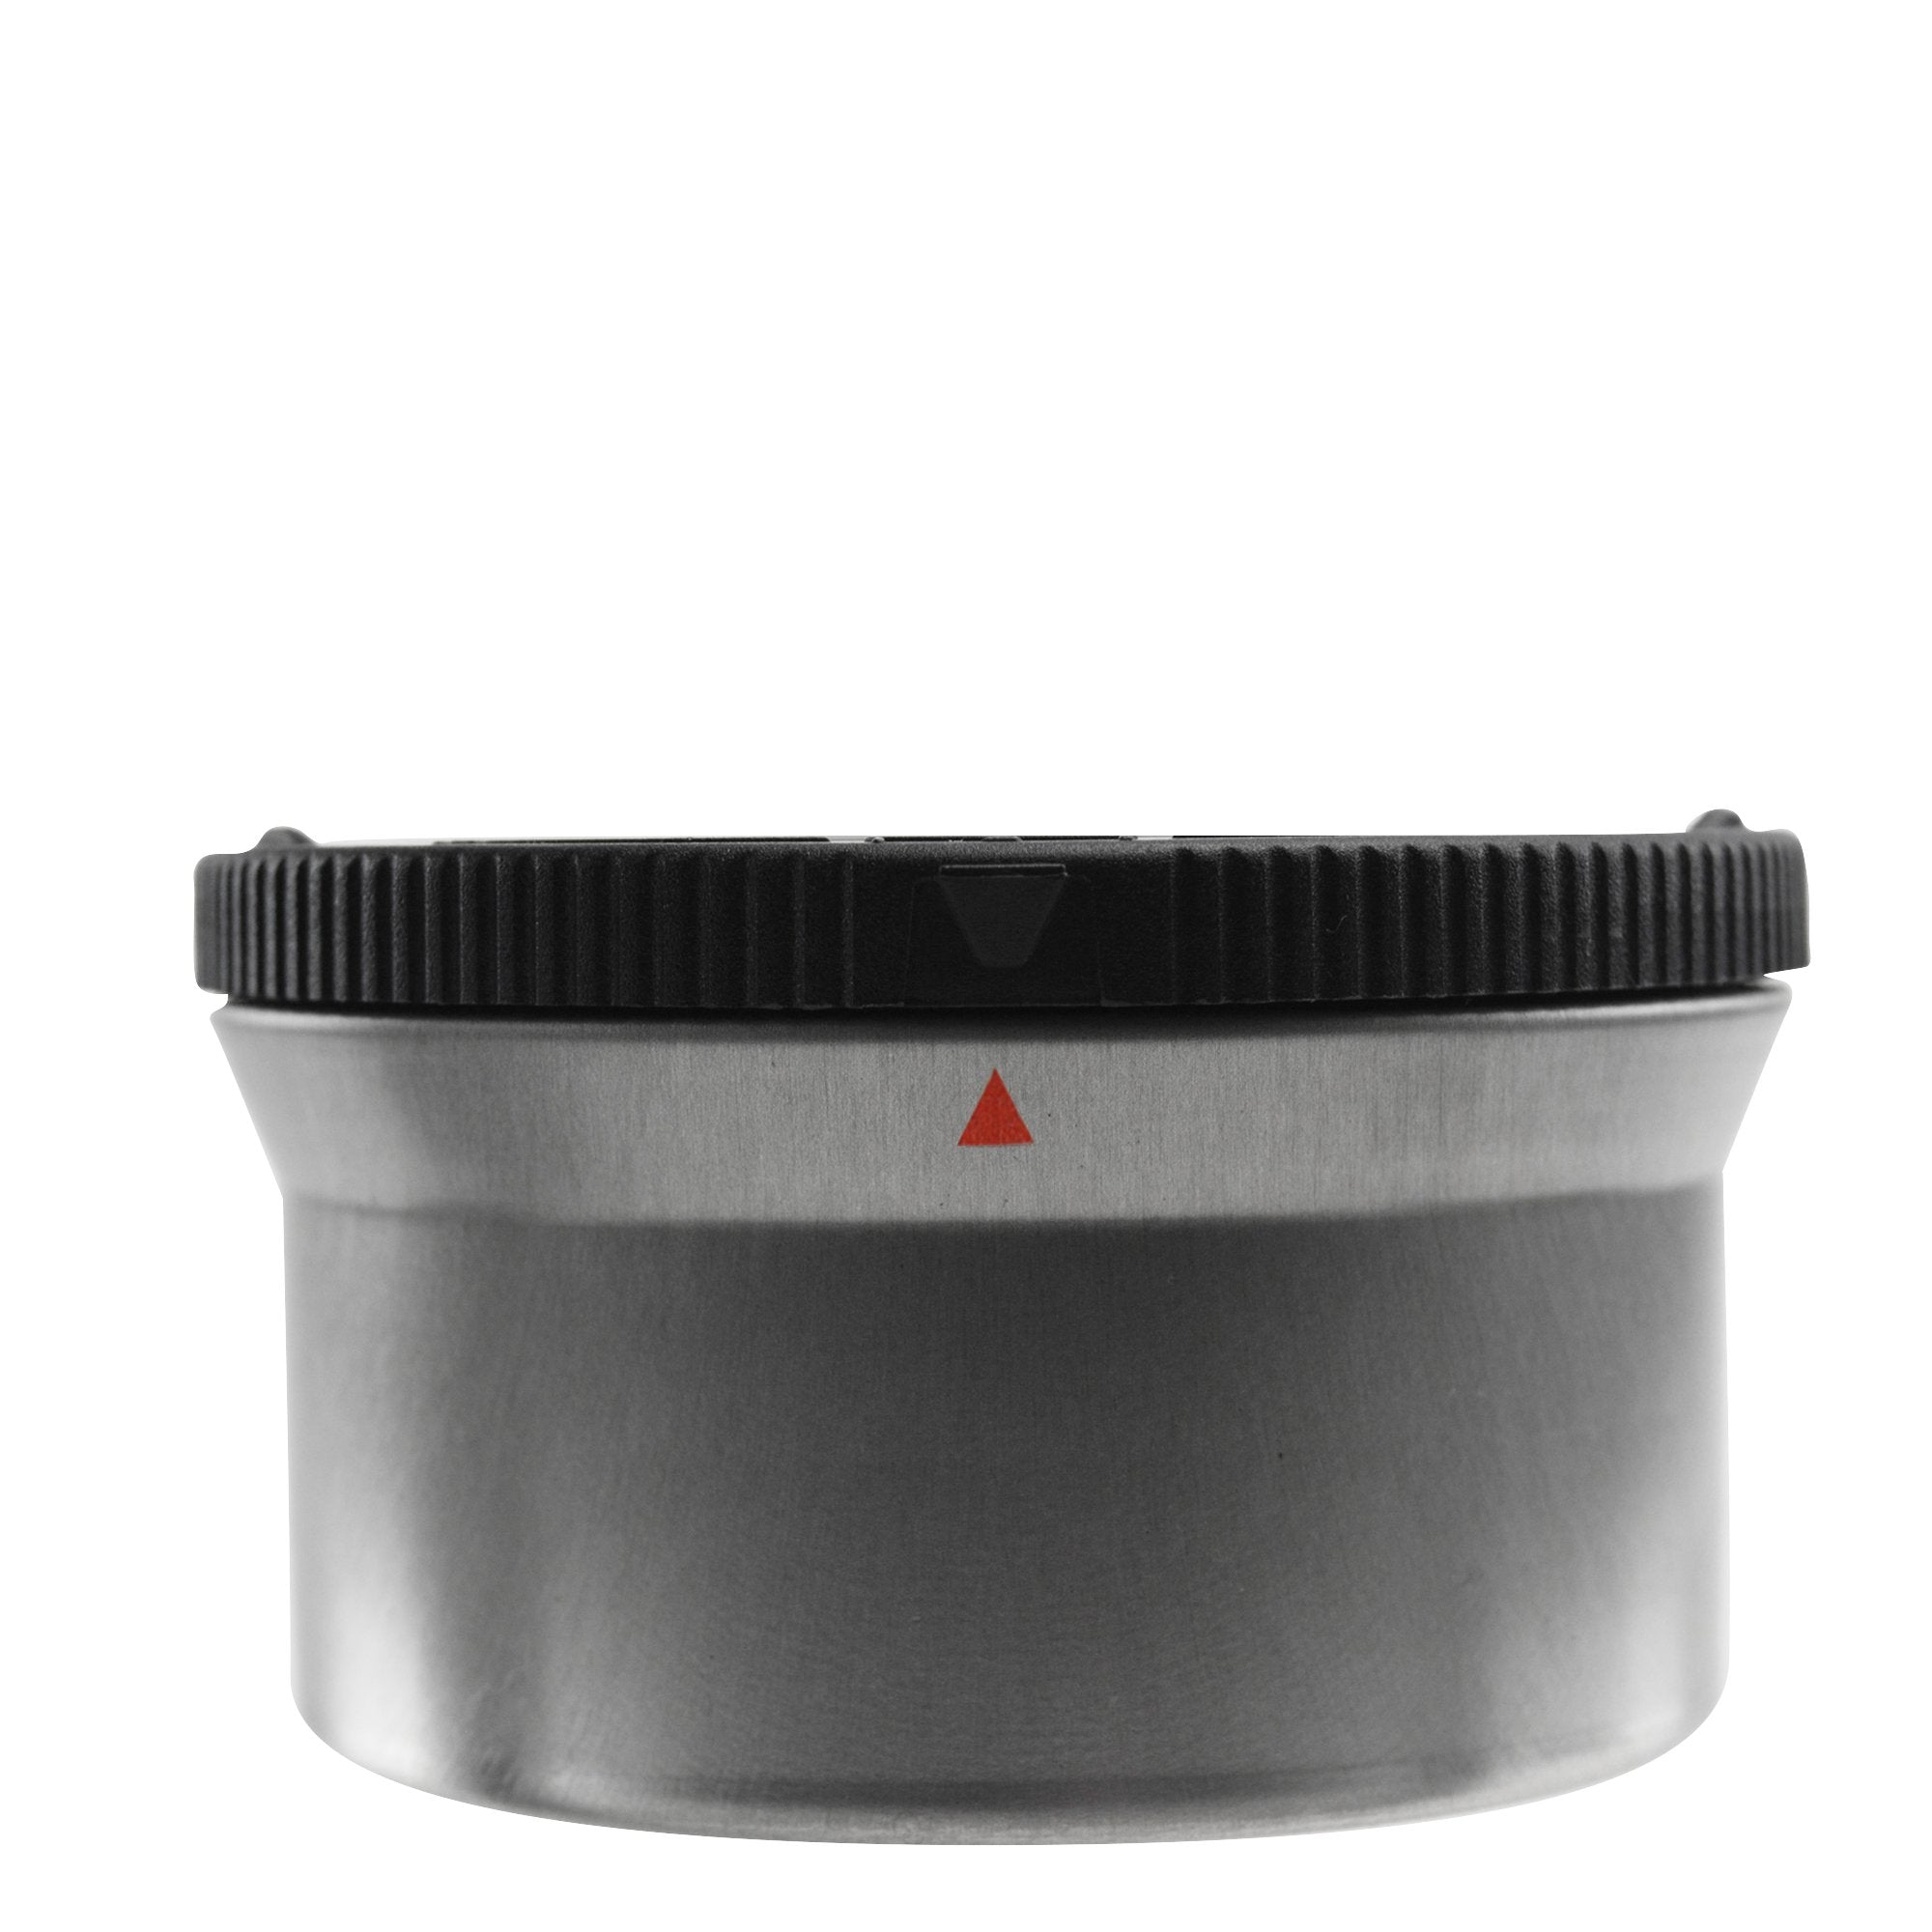 Sample Child Resistant | Safely Lock Sentinel Tin with Cap | Small and Medium - Brushed Metal - 1